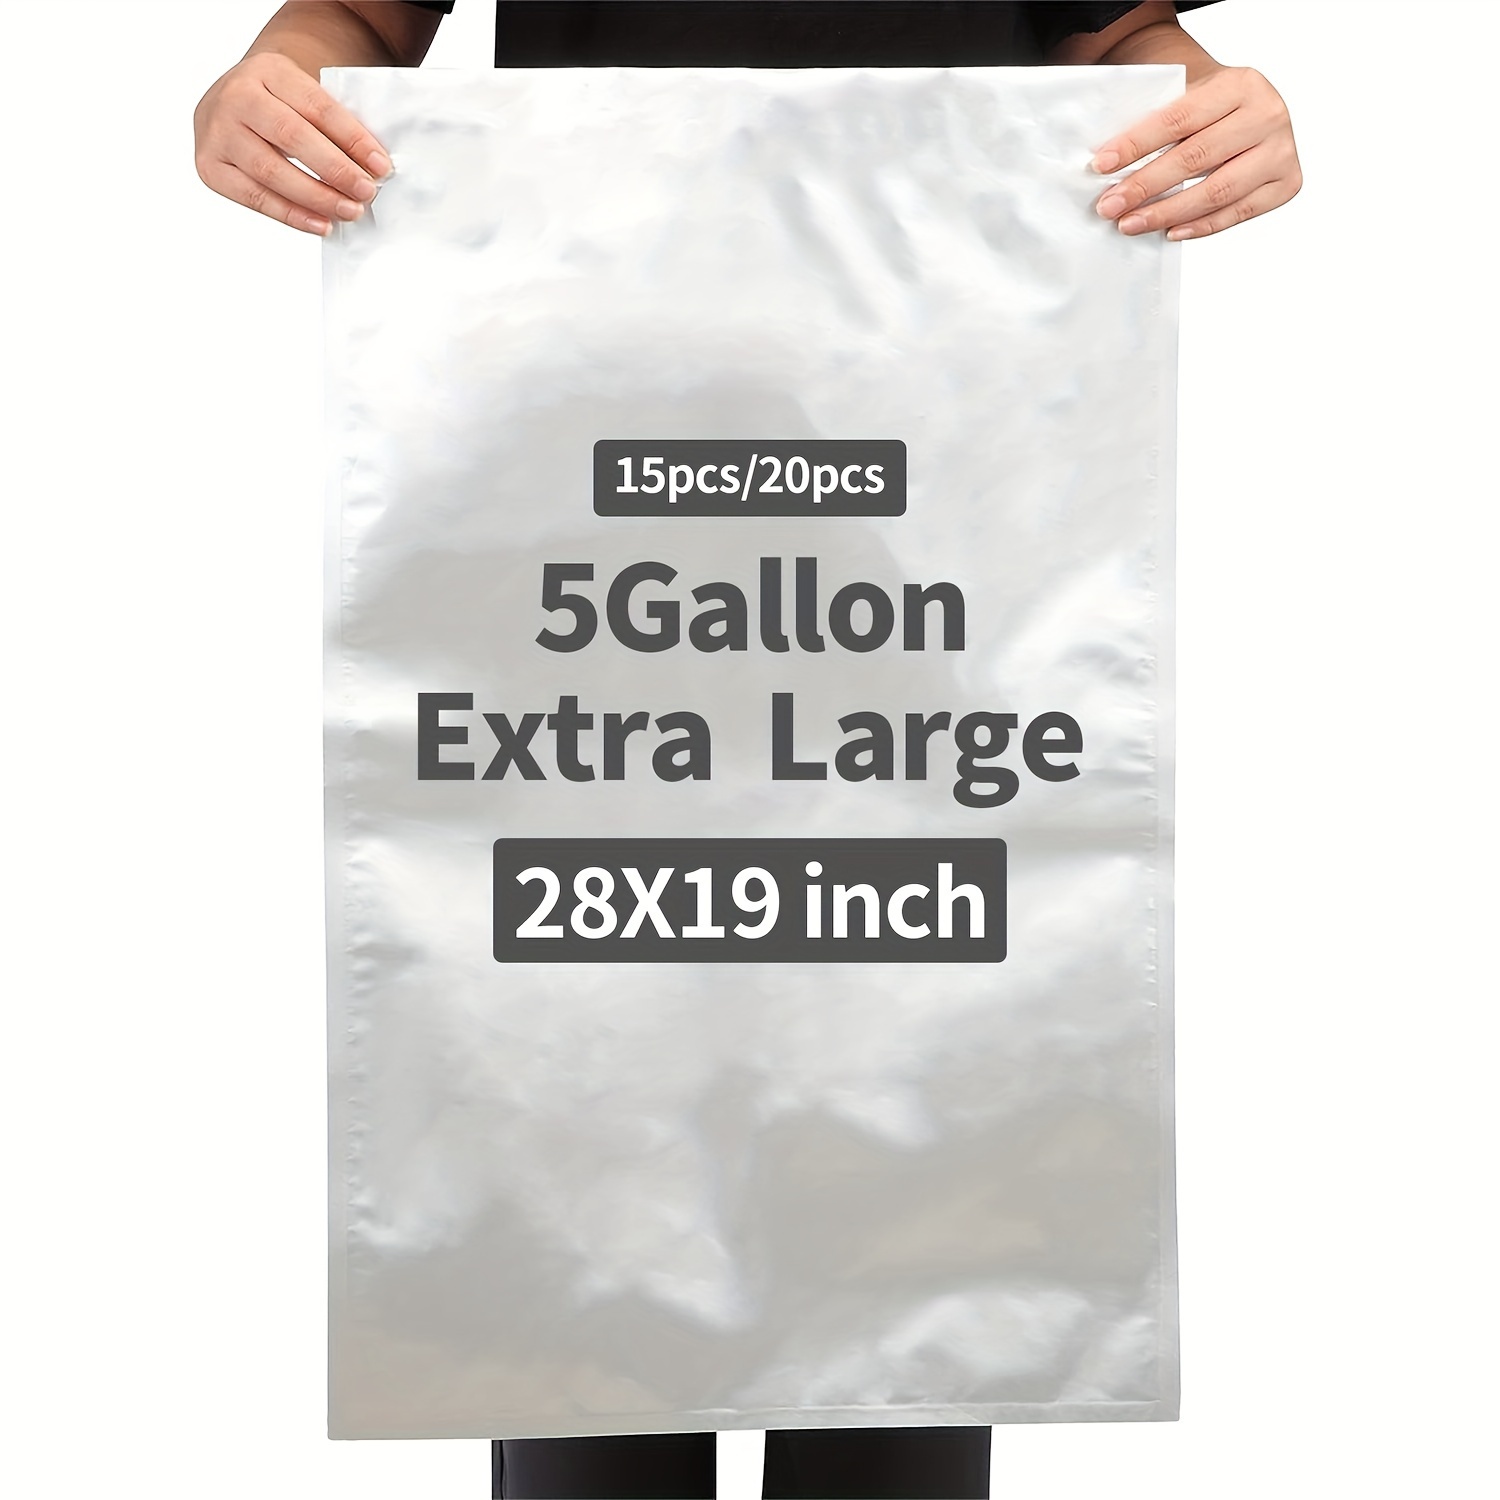 5-Gallon 5.5 Mil Heavy Duty Seal-Top Mylar Food Storage Bags and